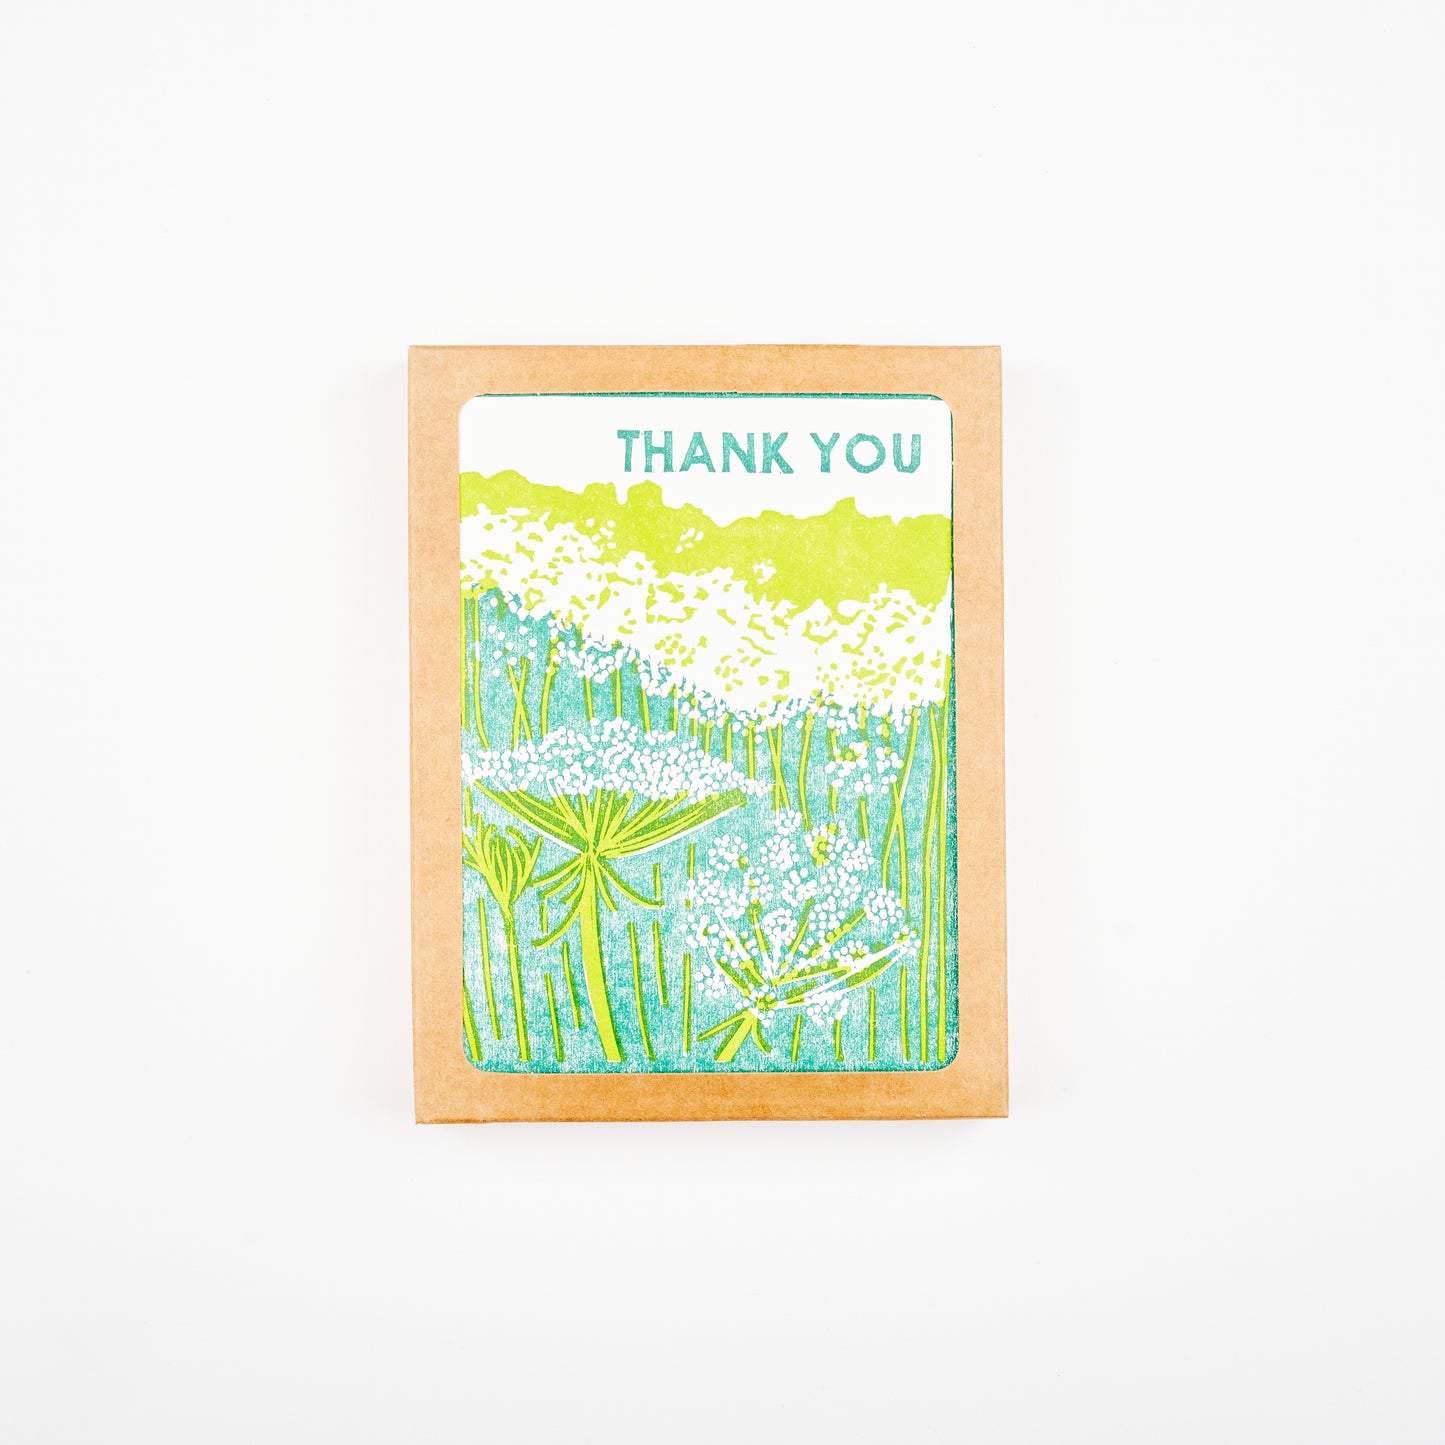 Heartell Press Thank You Cards, Set of 6